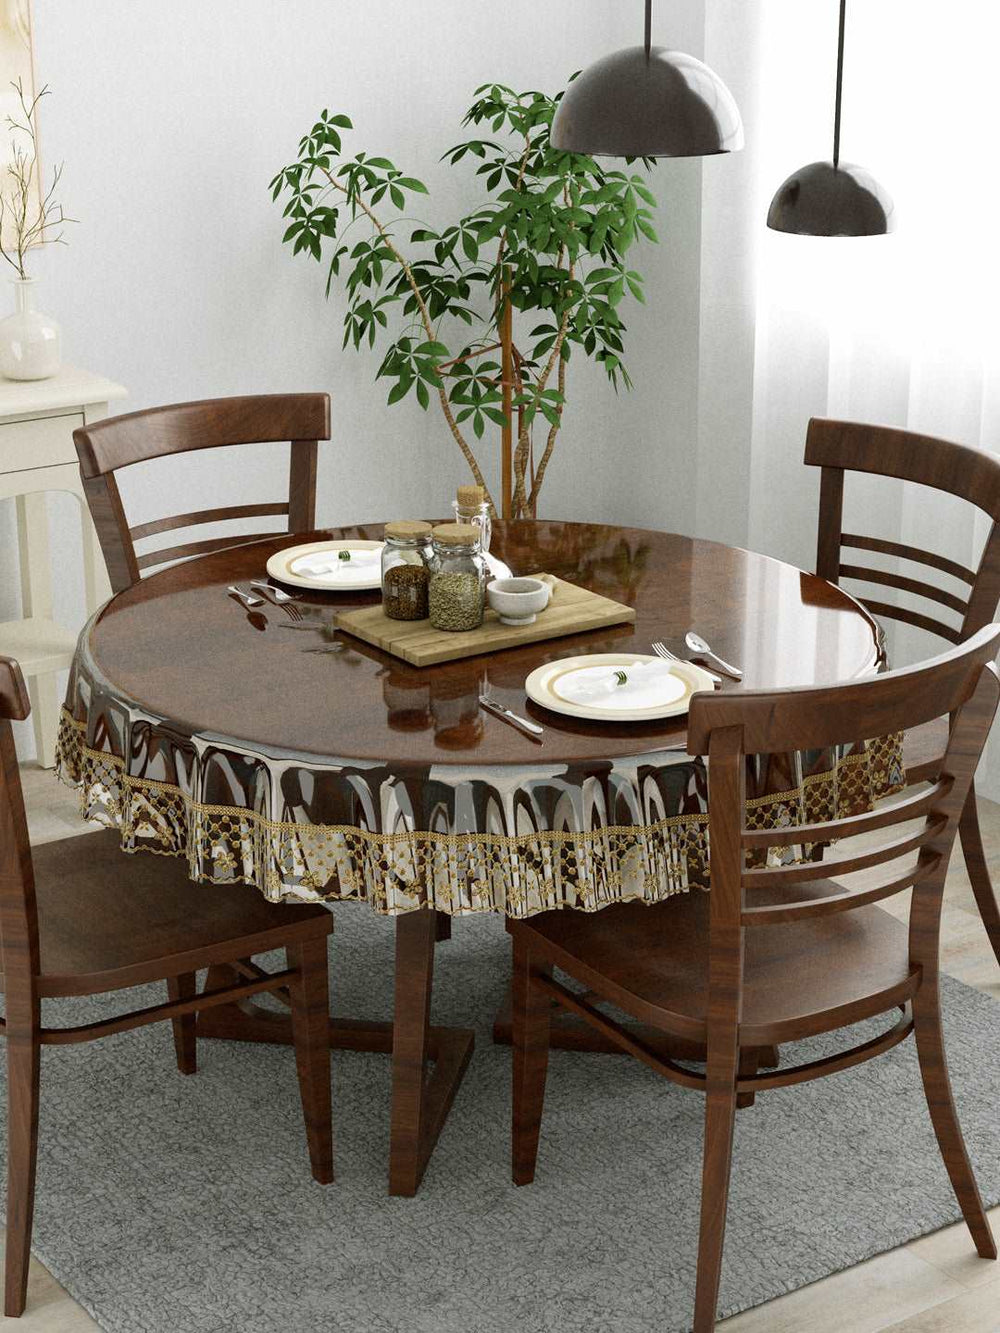 4 Seater Dining Table Cover; 60x60 Inches; Material - PVC; Anti Slip; Golden Lace